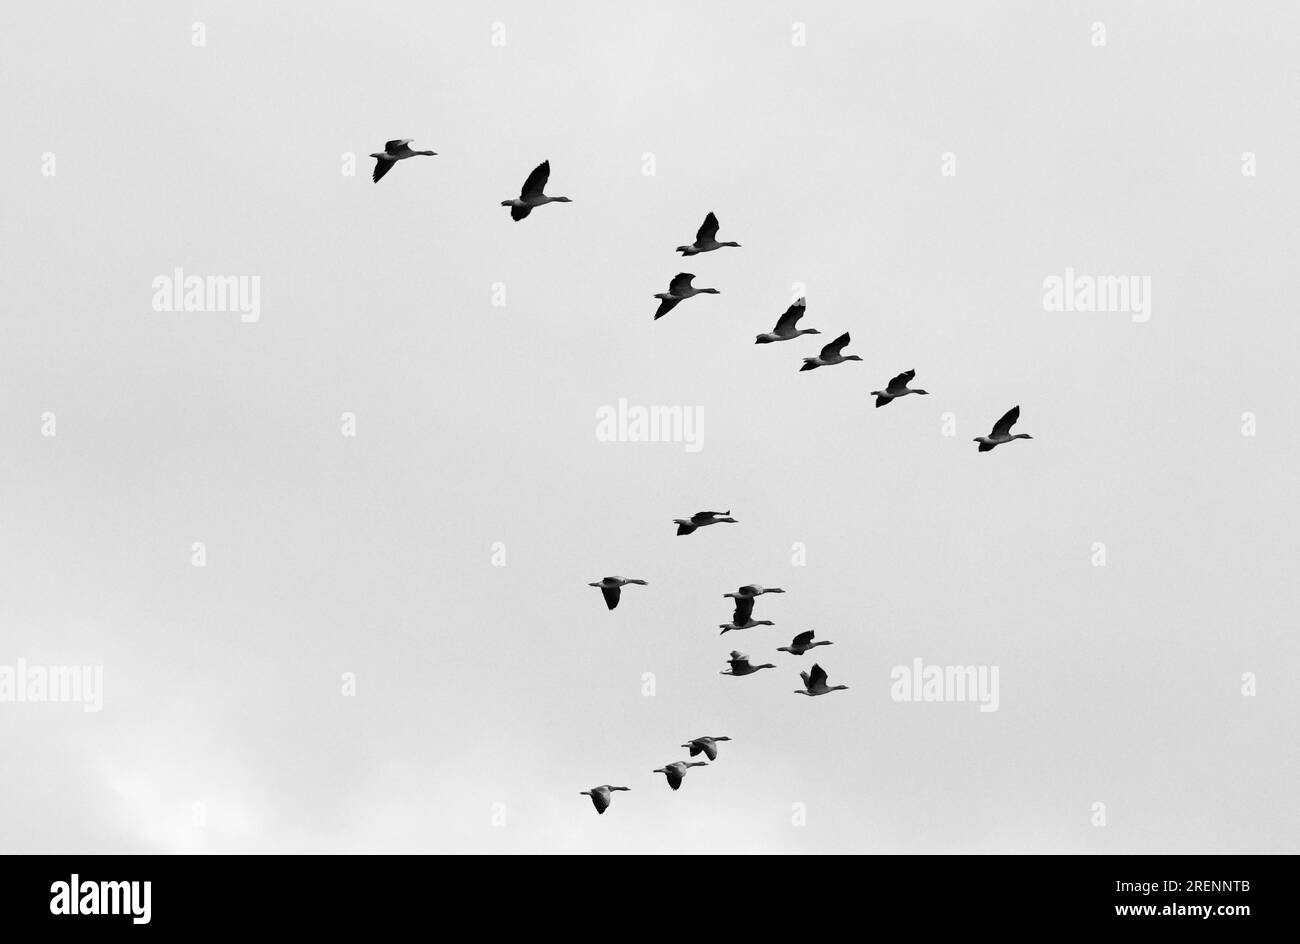 skein of geese flying over salthouse north norfolk england Stock Photo